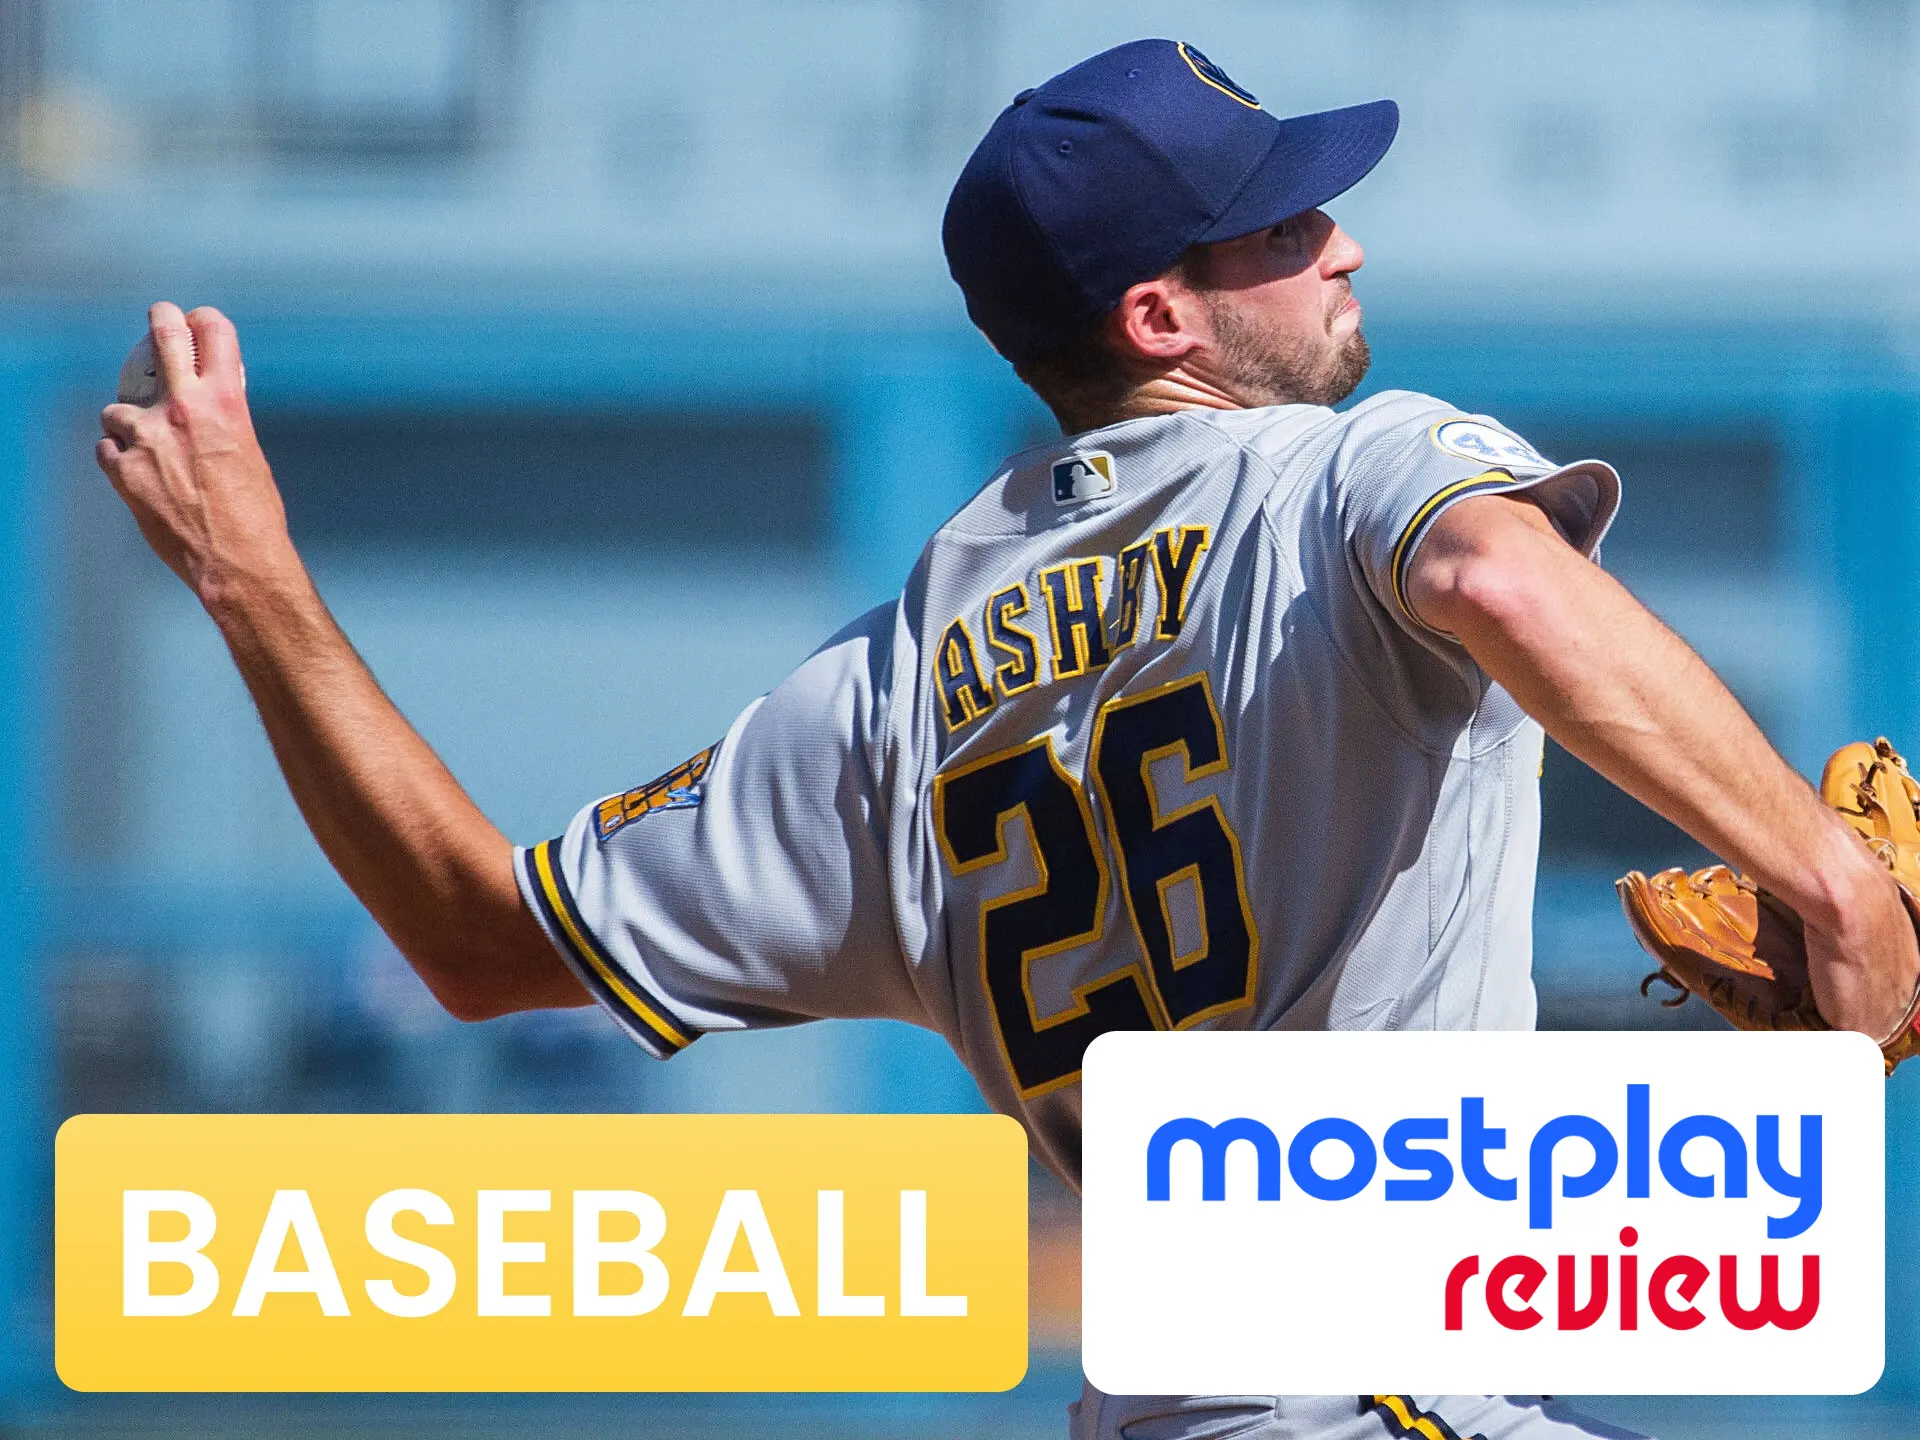 Bet on your favourite baseball team ay Mostplay.